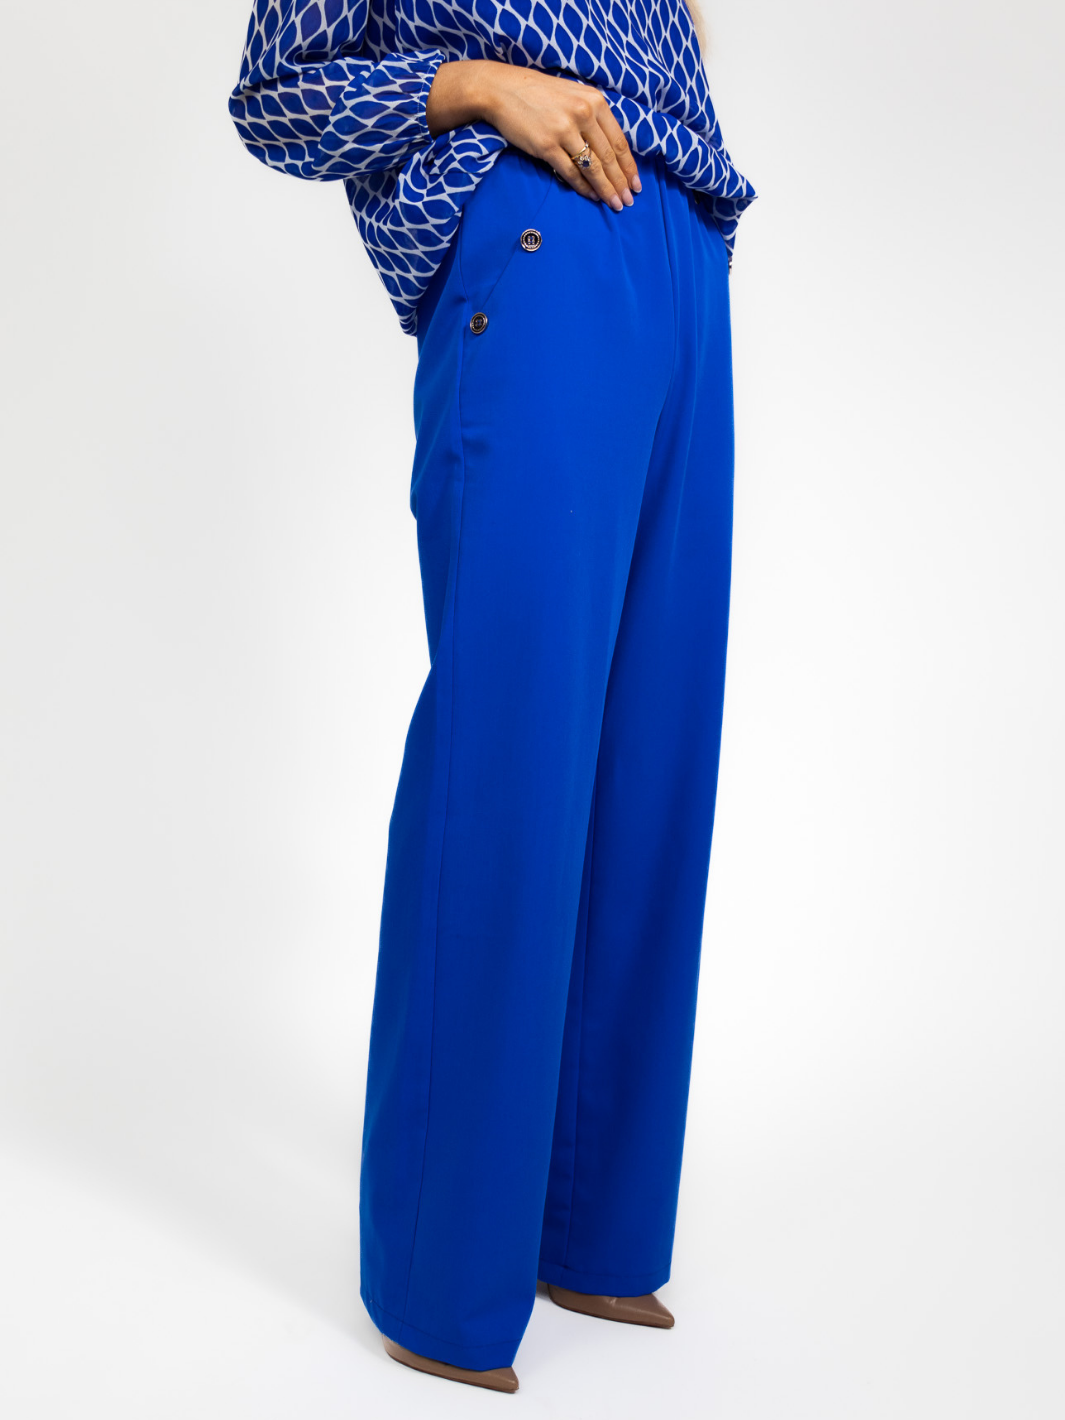 Kate & Pippa Sardinia Button Trousers In Blue-Nicola Ross